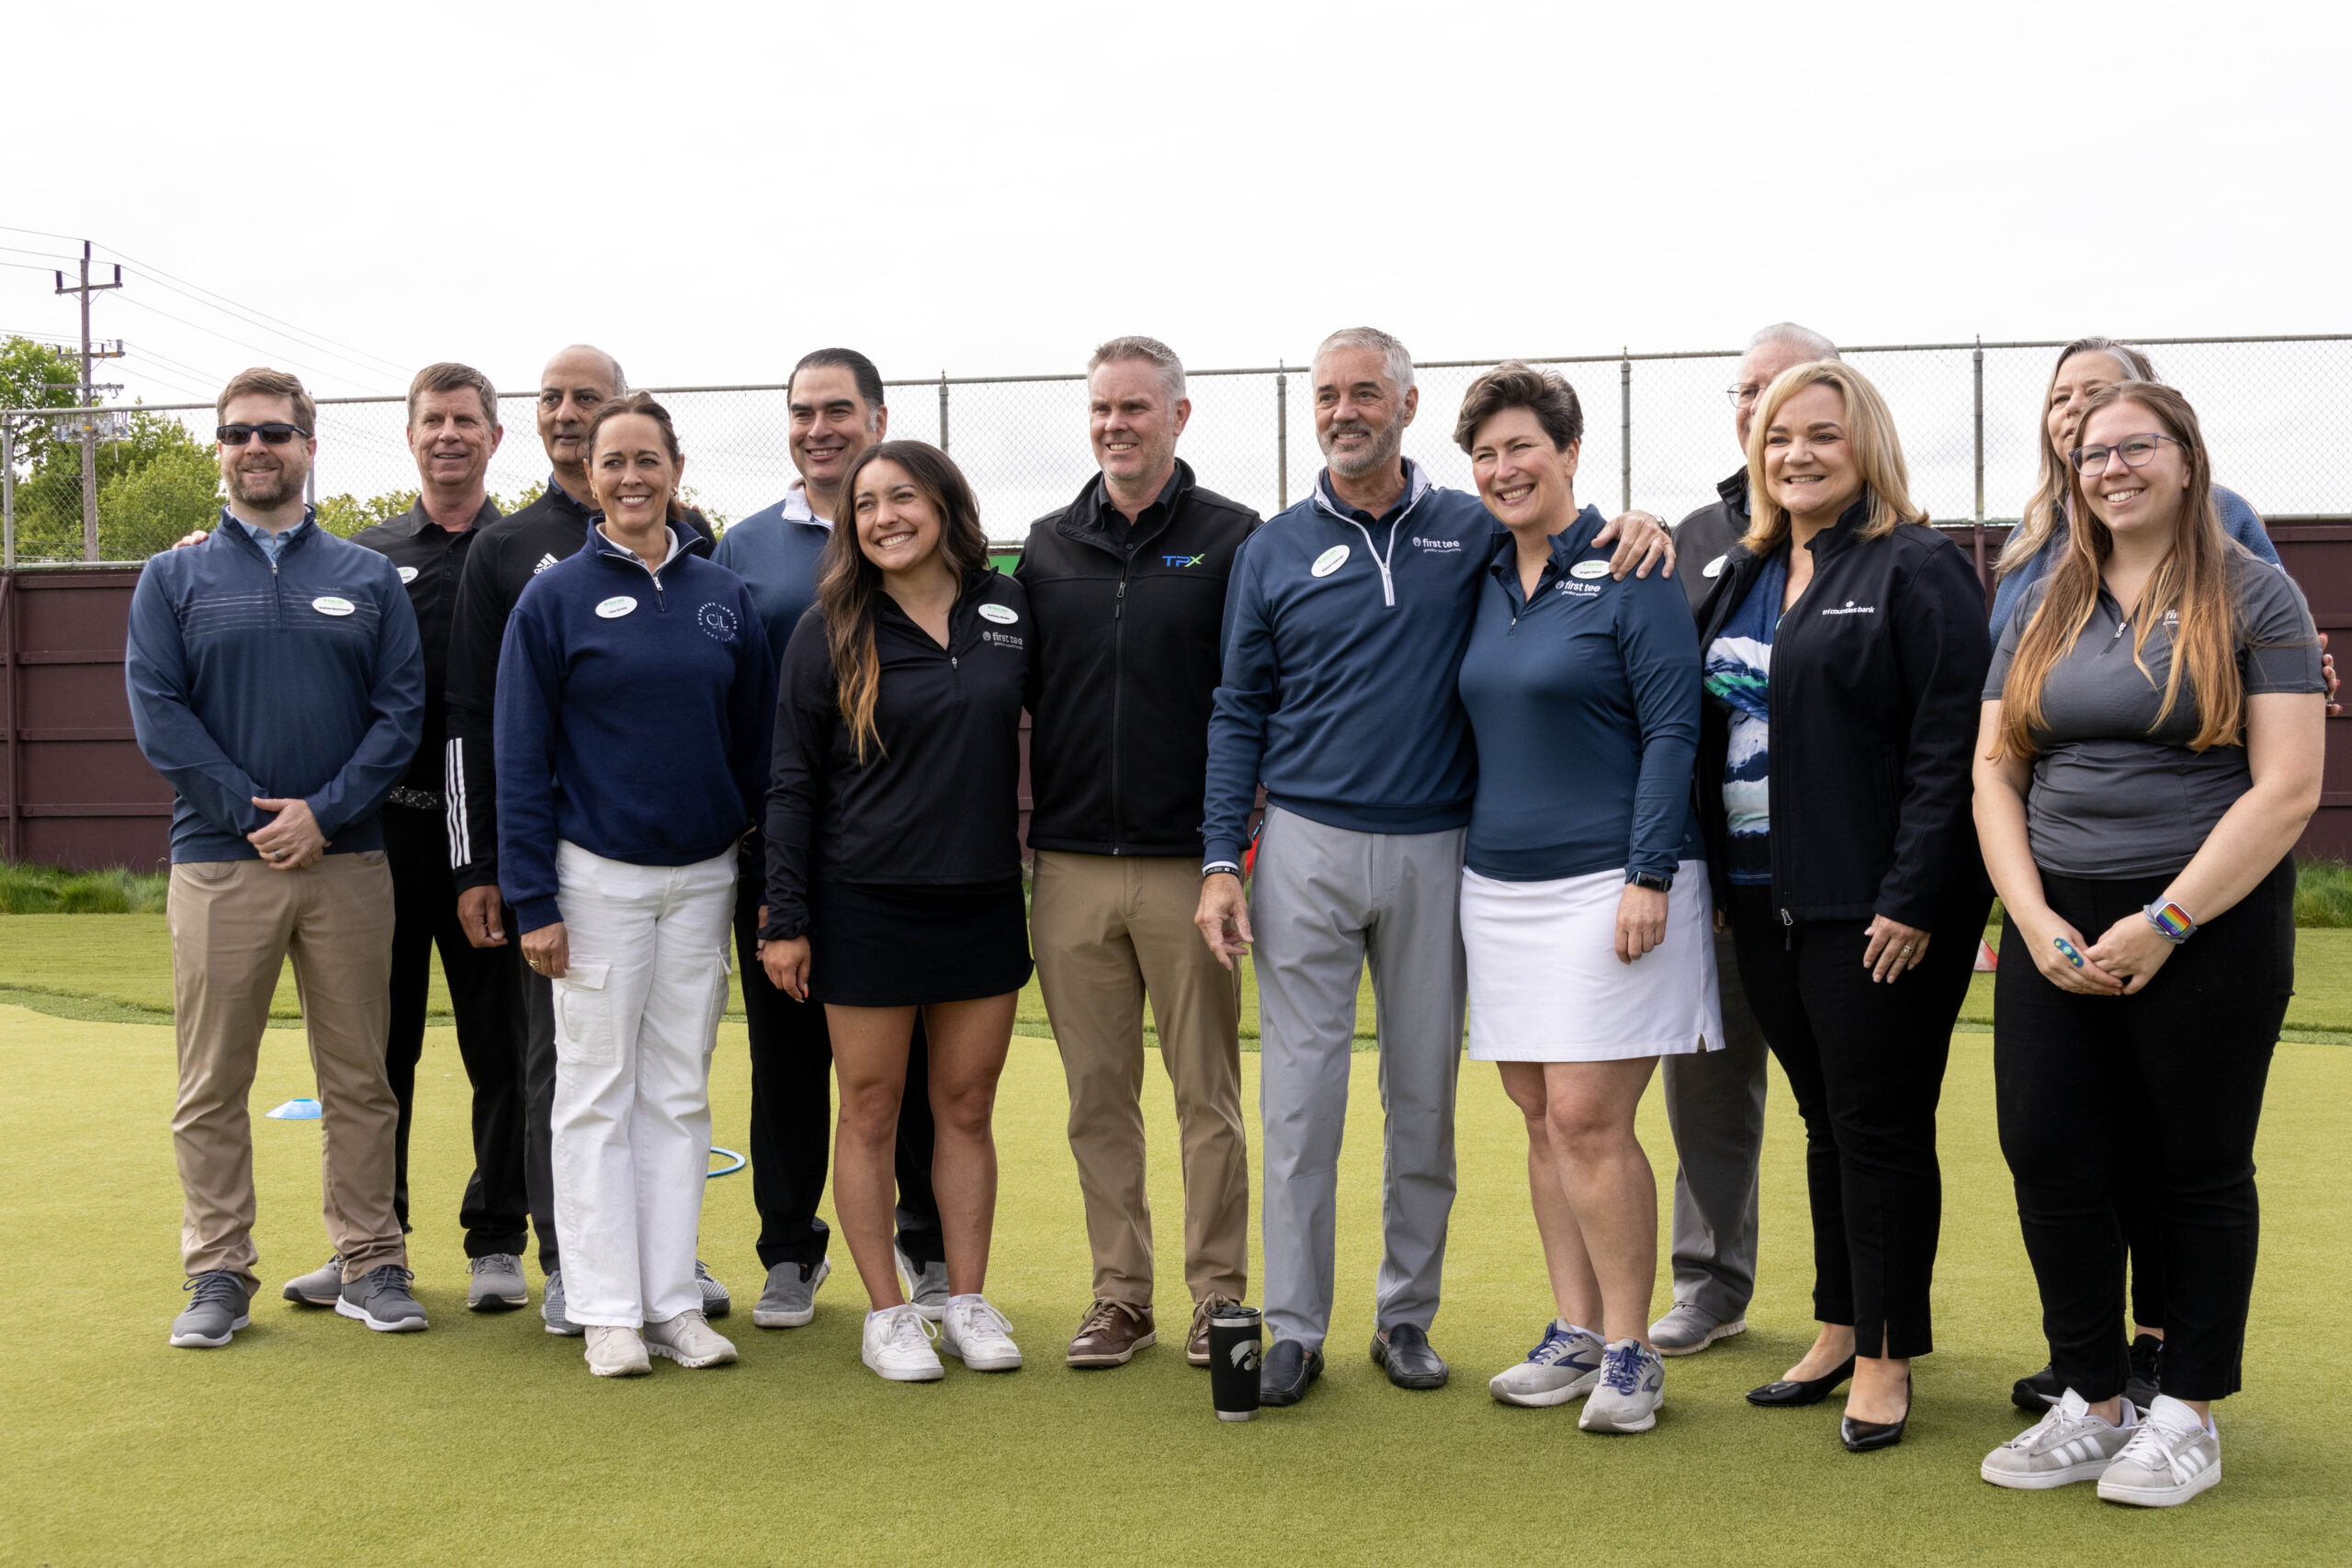 A group photo of everyone from the First Tee Greater Sacramento at the ribbon cutting ceremony. They are standing on the practice green of the golf facility.